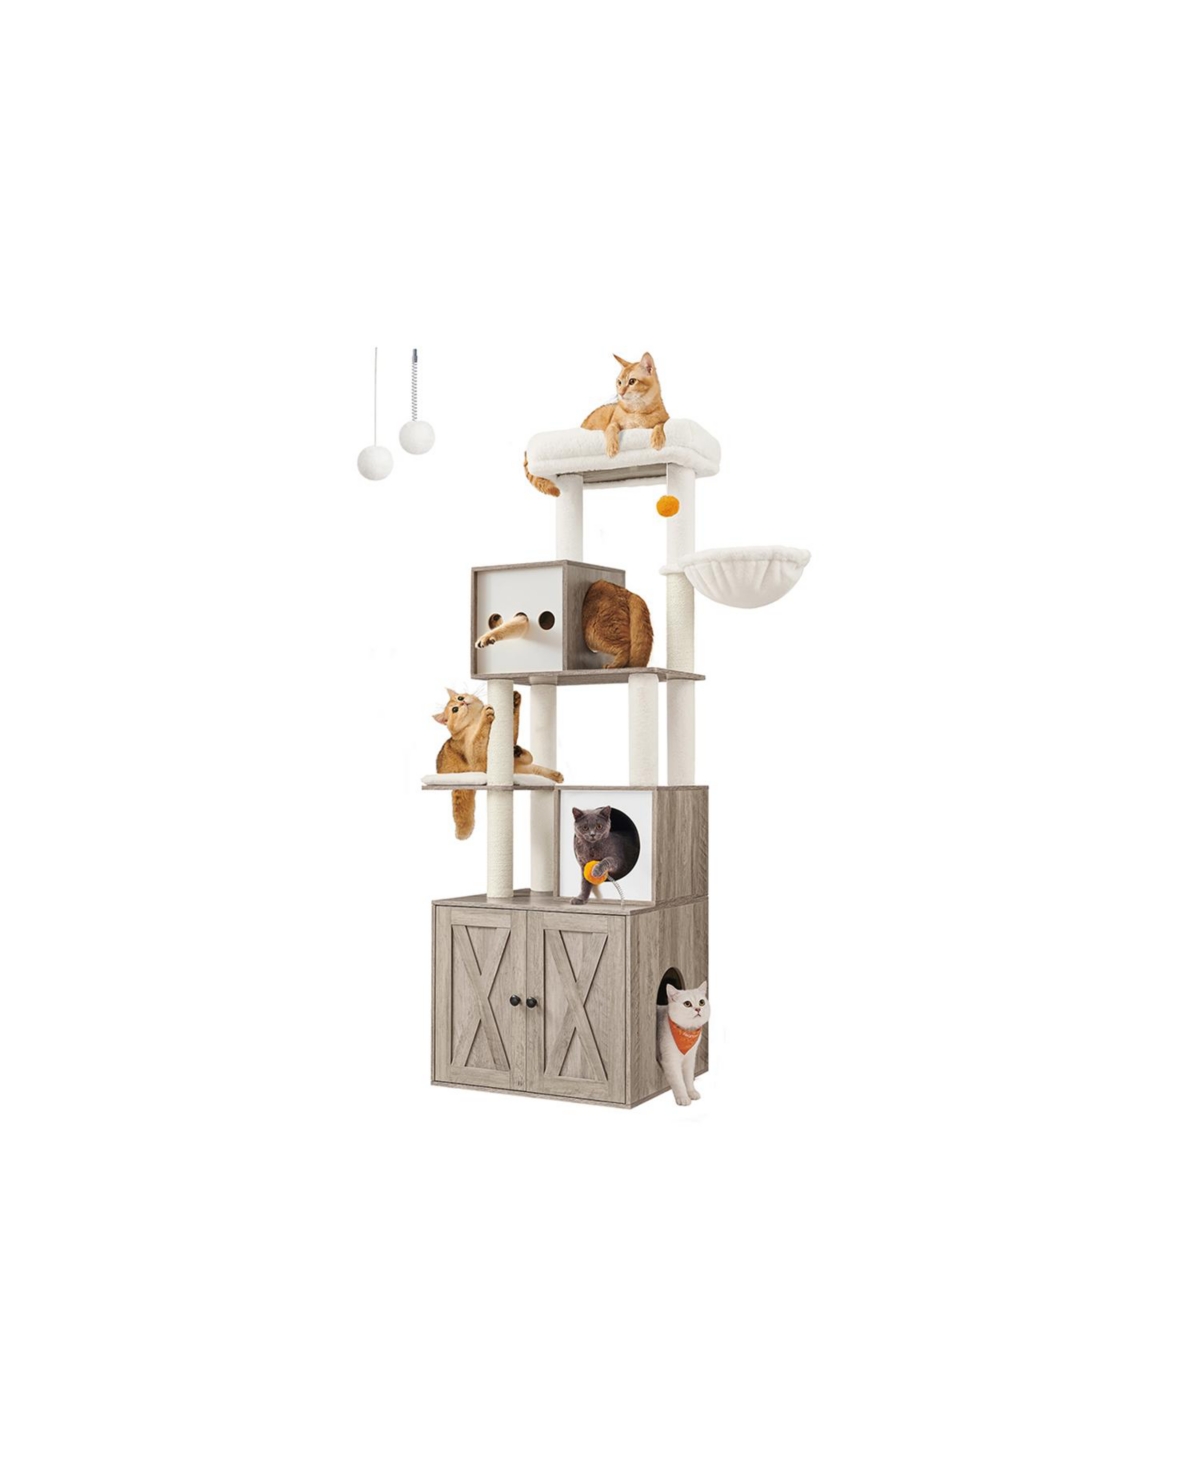 72.8-inch Tall Cat Tree With Litter Box Enclosure, Scratching Posts - Rustic brown